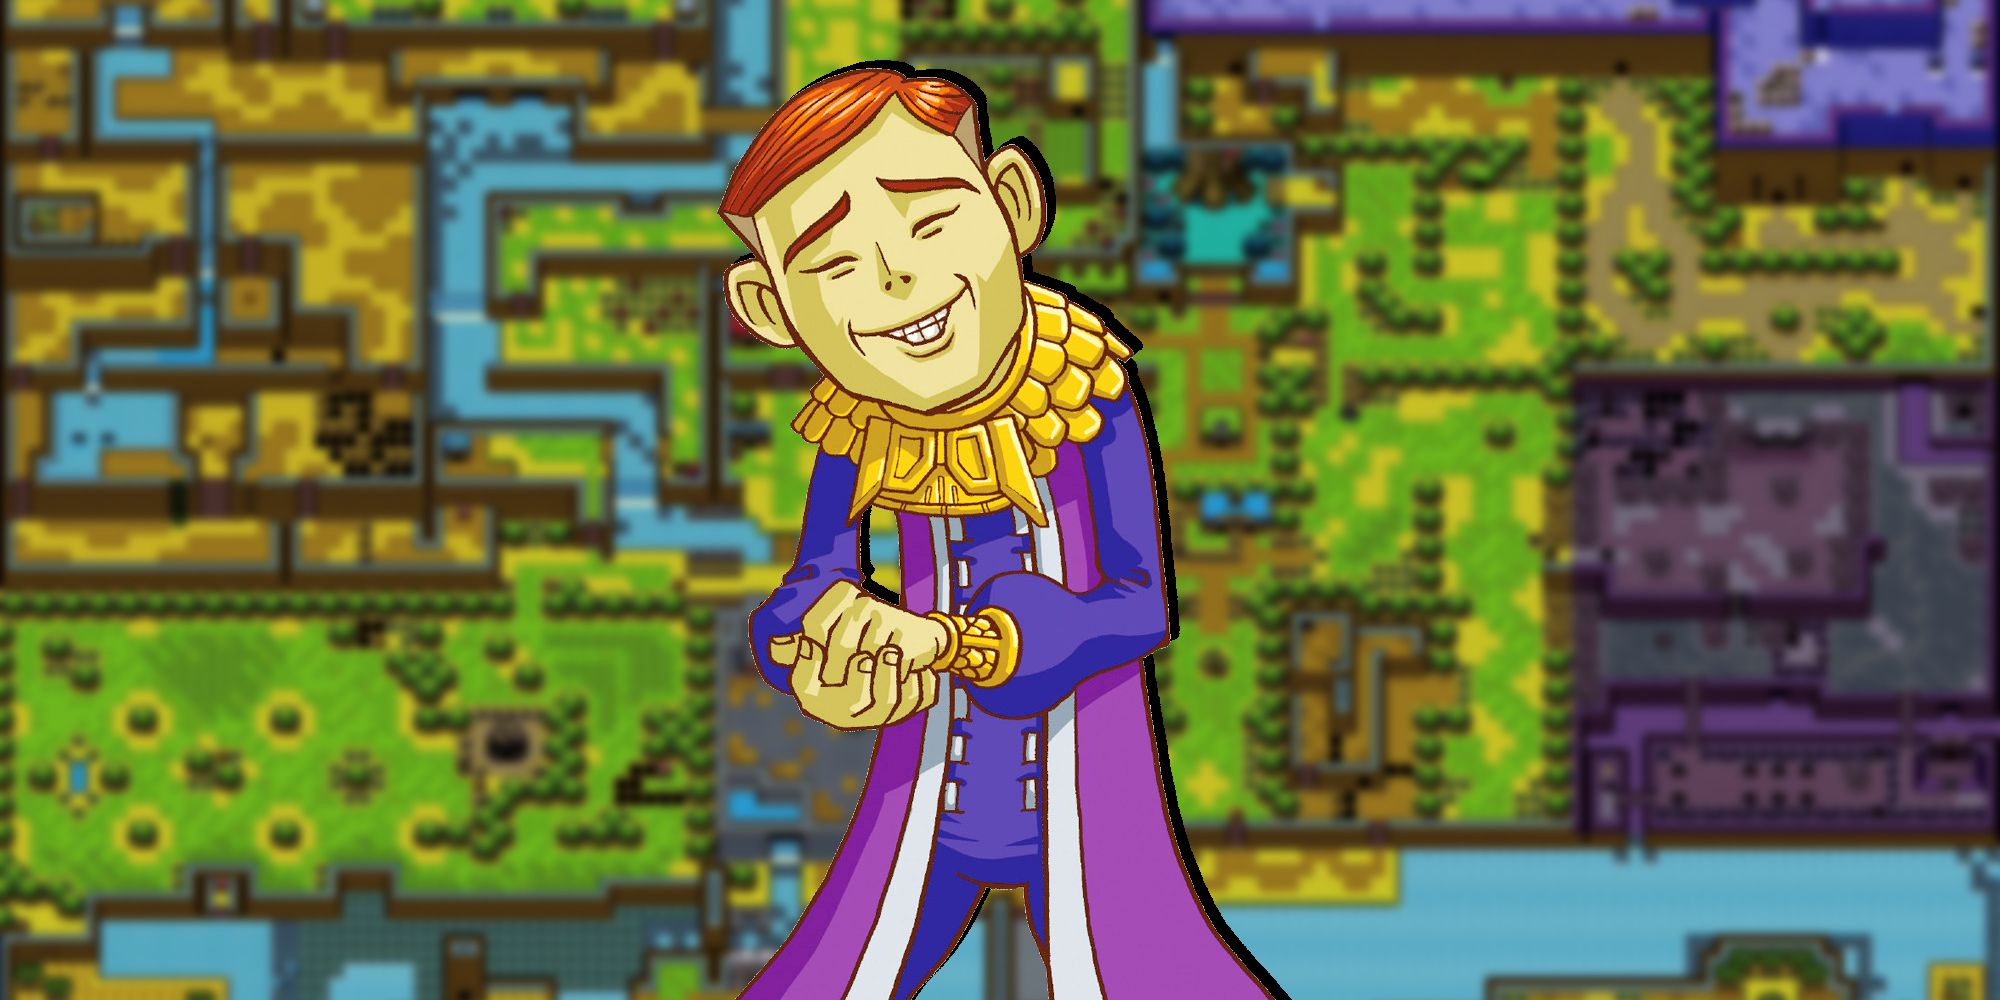 Artwork of the Happy Mask Salesman from The Legend of Zelda: Oracle of Ages overlaid on a blurred background of the game's map.